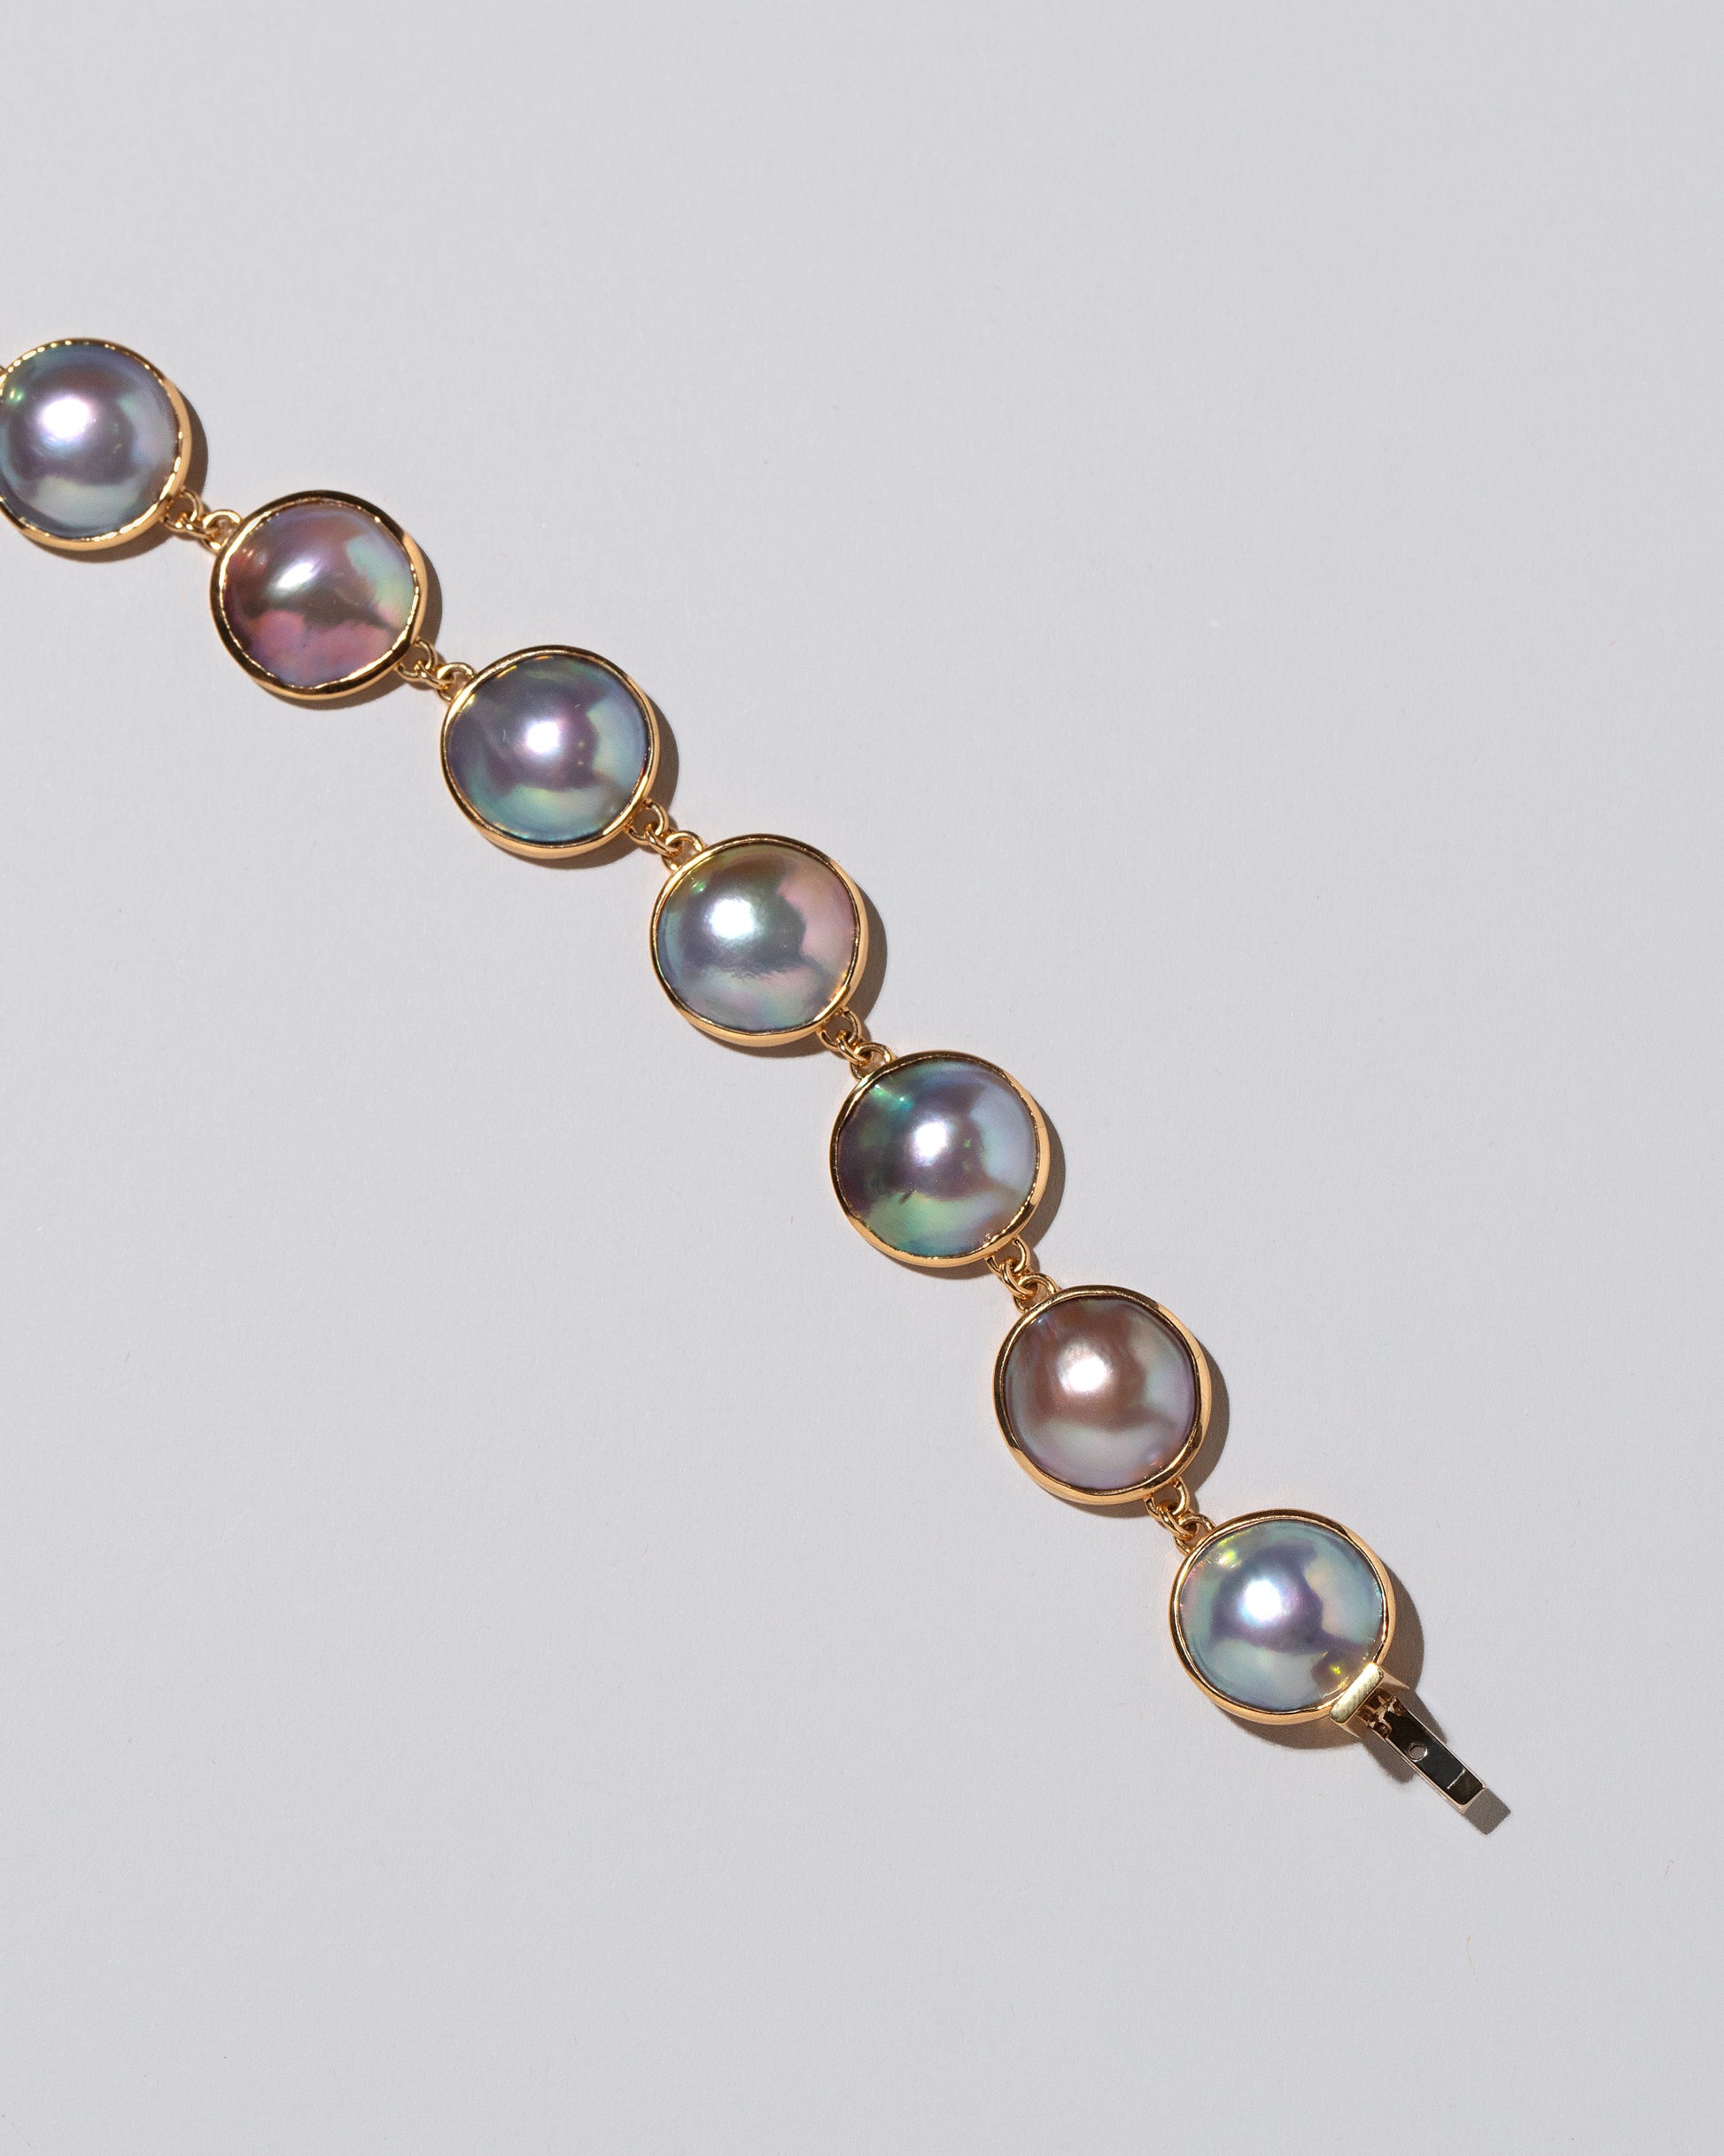 Loon Mabe Pearl Bracelet on light color background.